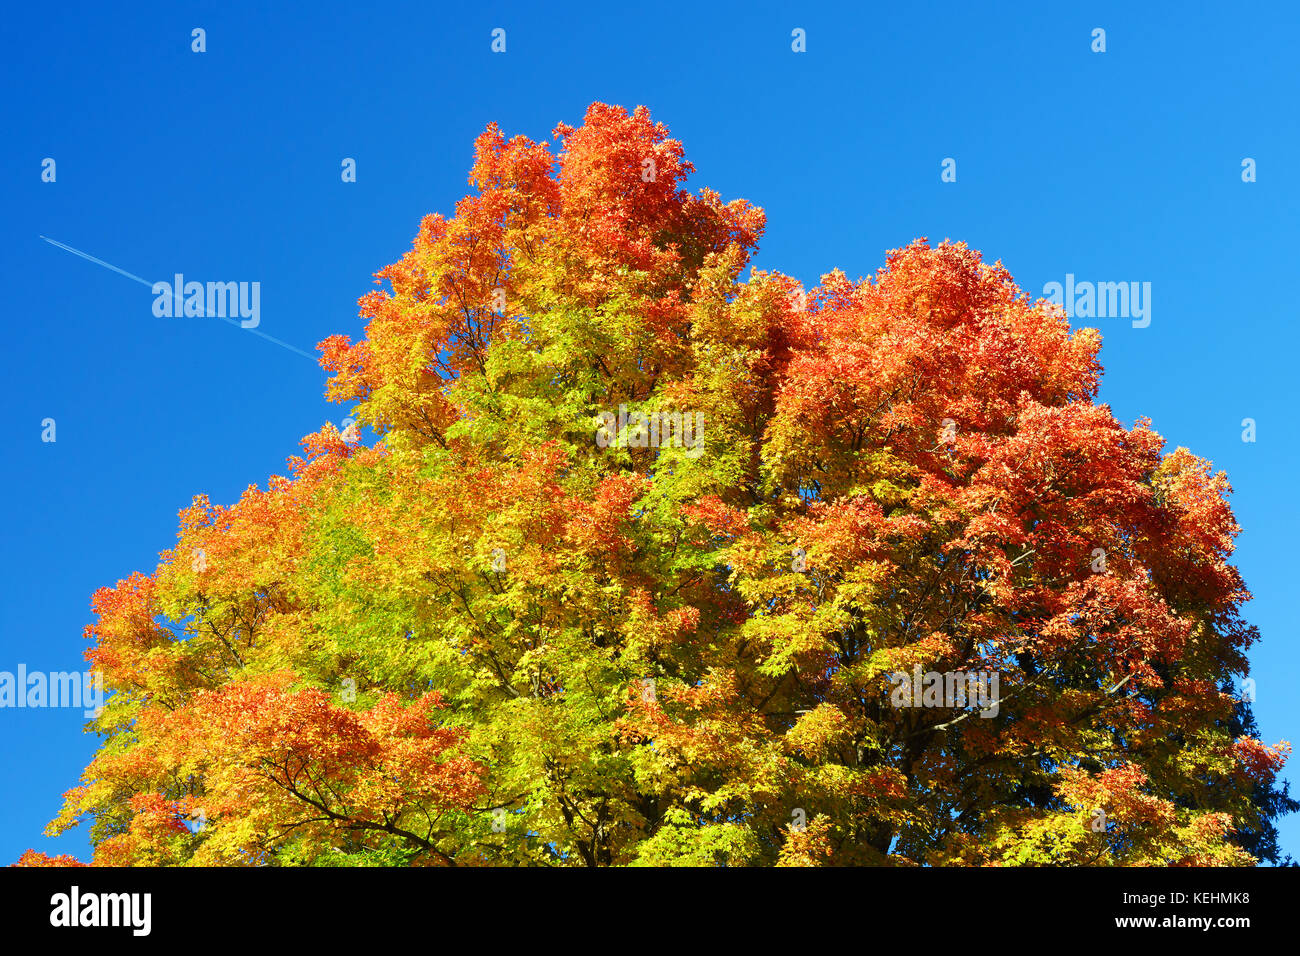 Maple tree with autumnal colors agains a deep blue sky. Stock Photo